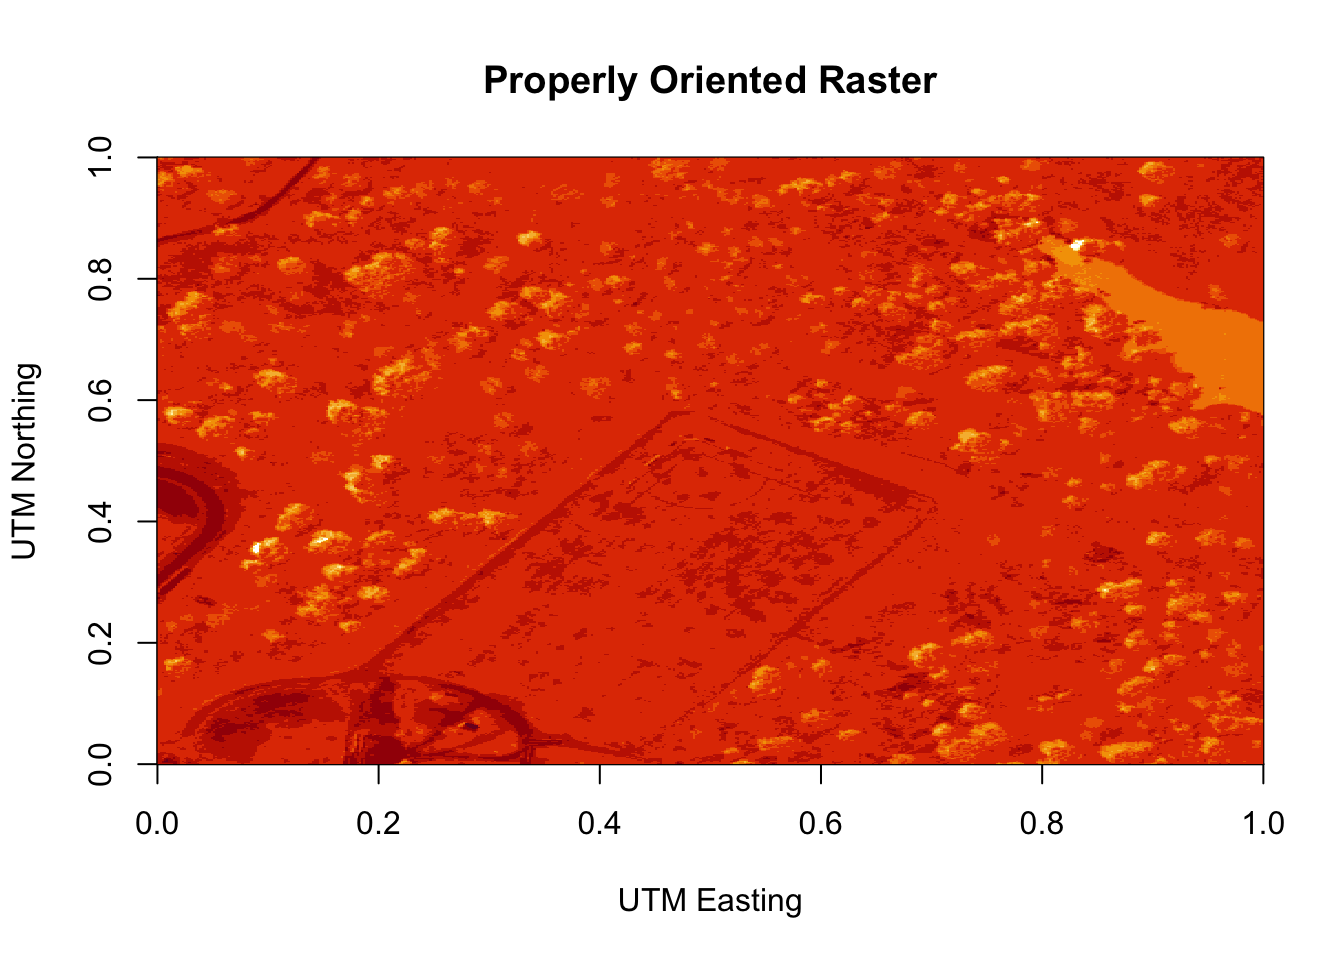 Plot of the properly oriented raster image of the band 9 data. In order to orient the image correctly, the coordinate reference system was defined and assigned to the raster object. X-axis represents the UTM Easting values, and the Y-axis represents the Northing values.